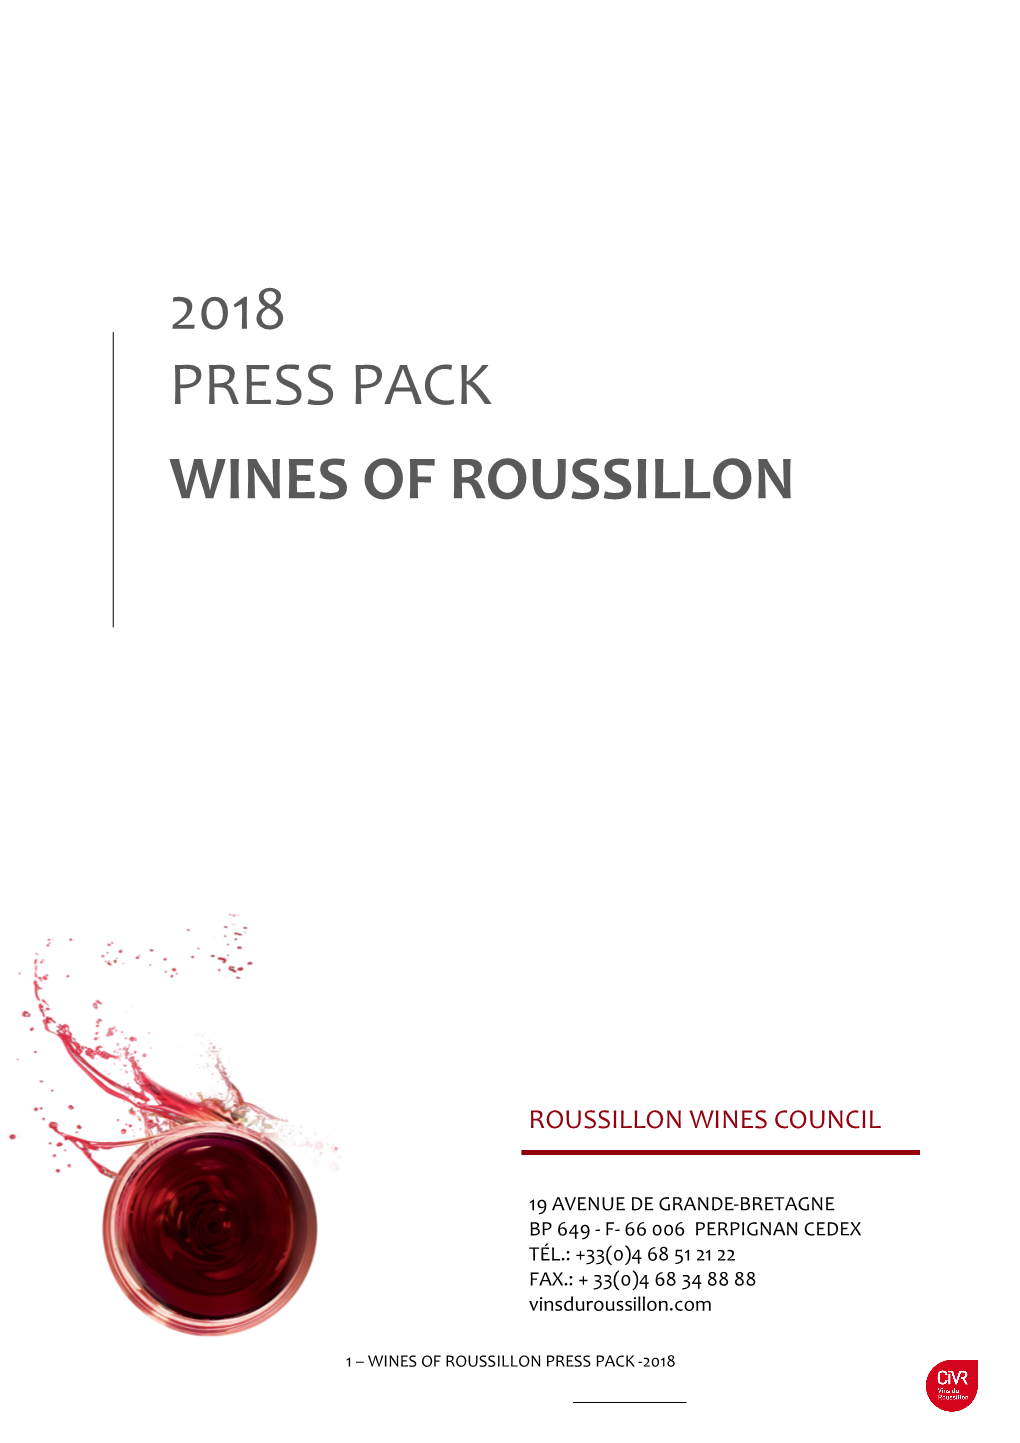 2018 Press Pack Wines of Roussillon